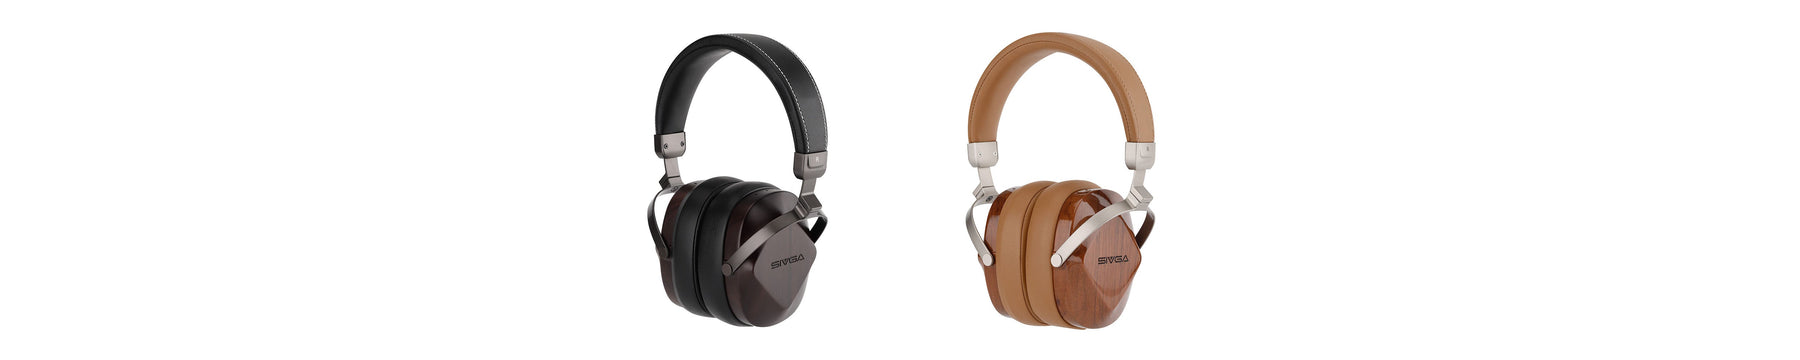 Introducing Sivga Oriole: A Classic RoseWood Headphone With In-House Developed 50mm Dynamic Driver